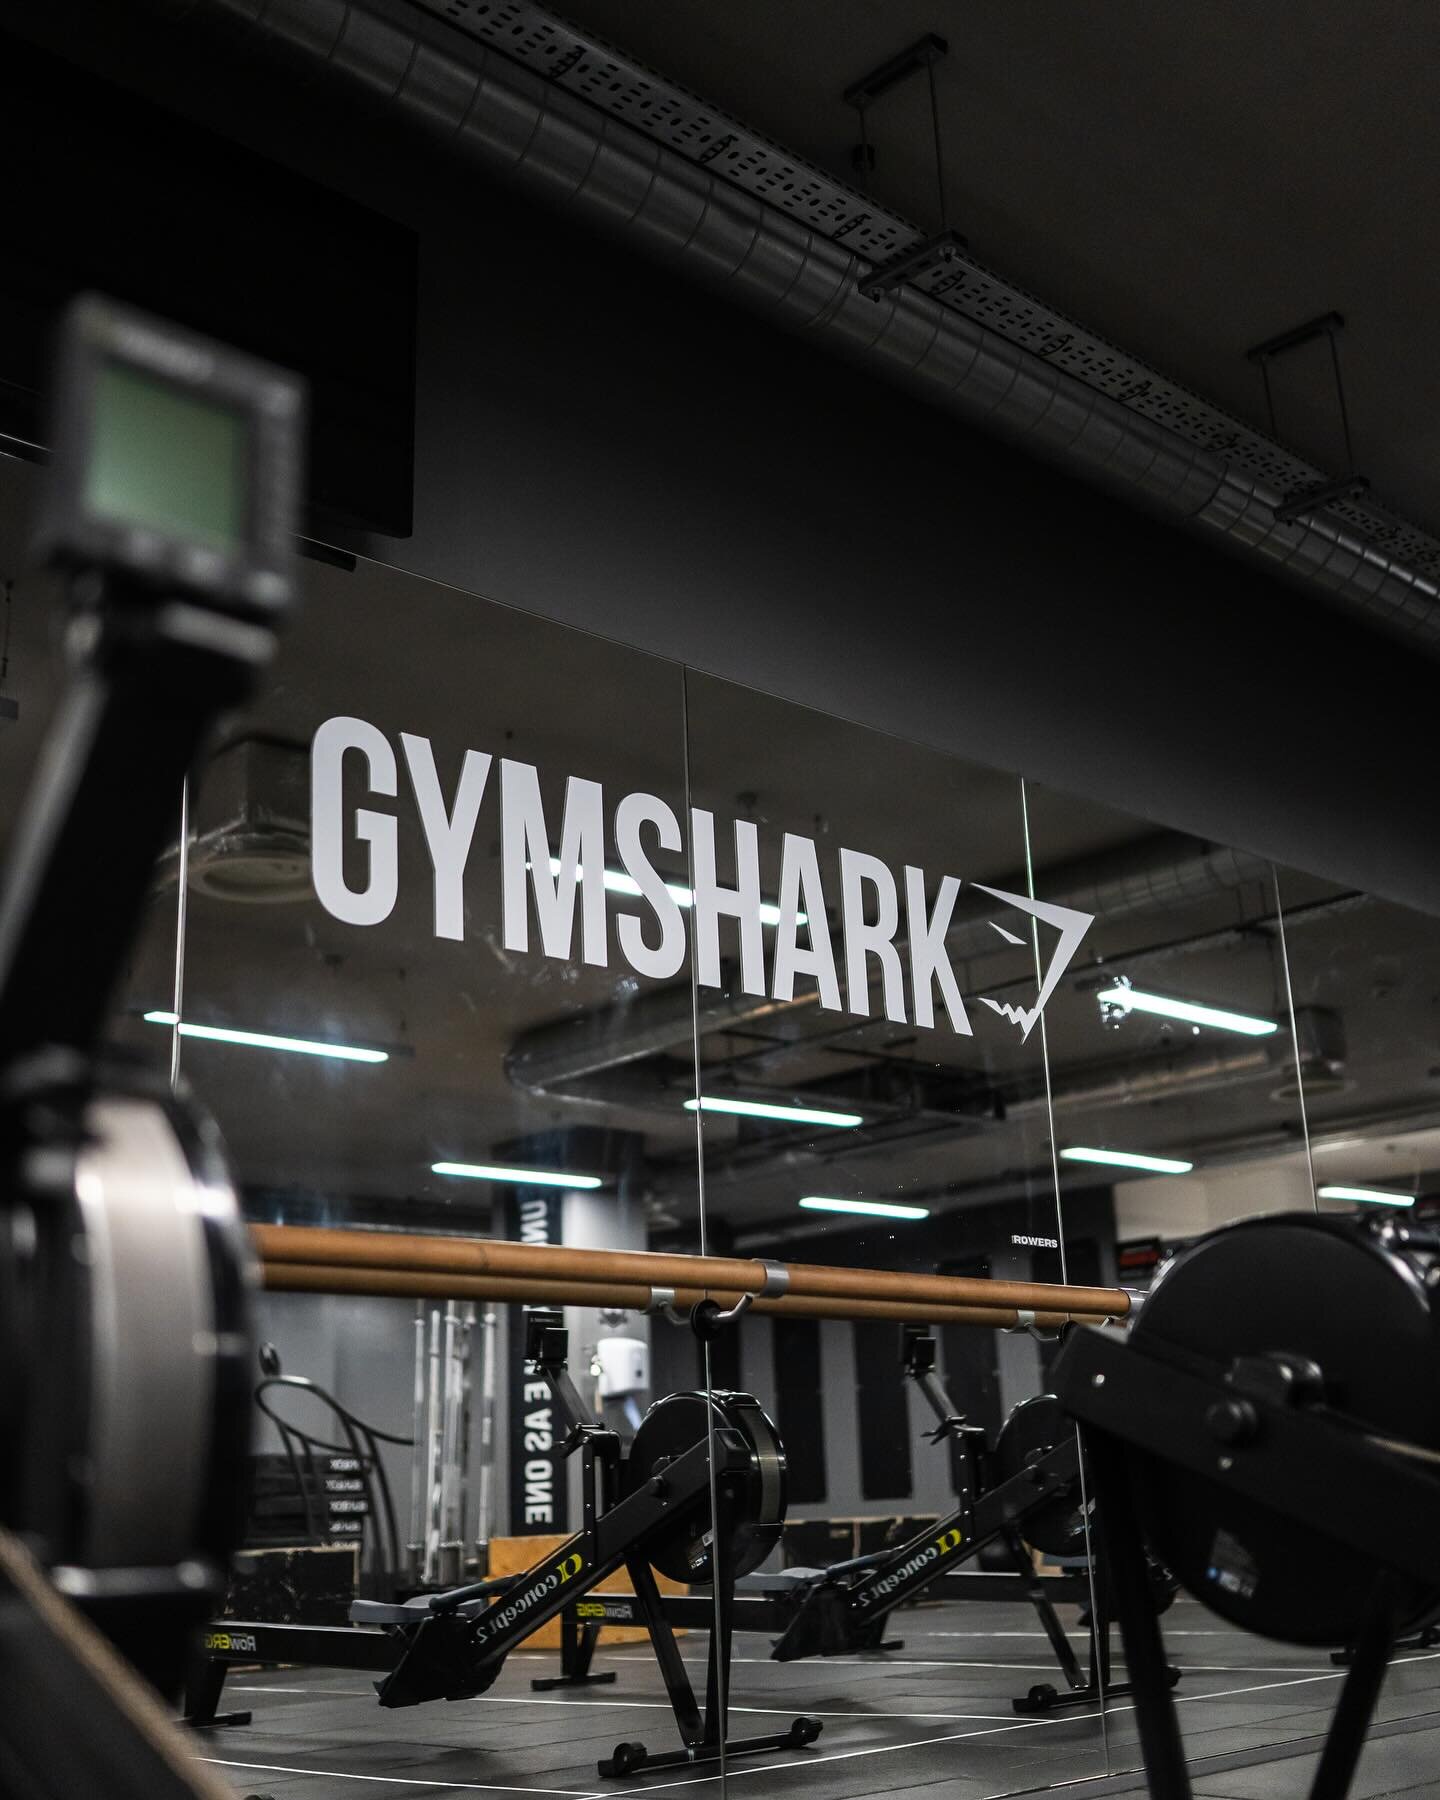 ONE LDN | GYMSHARK

The start of a 6 week FNL take over, connecting like minded people through their love of fitness! 

What an amazing turnout, we can&rsquo;t wait for week 2! 

The winning team from week 1 will be announced Sunday evening 

Tickets